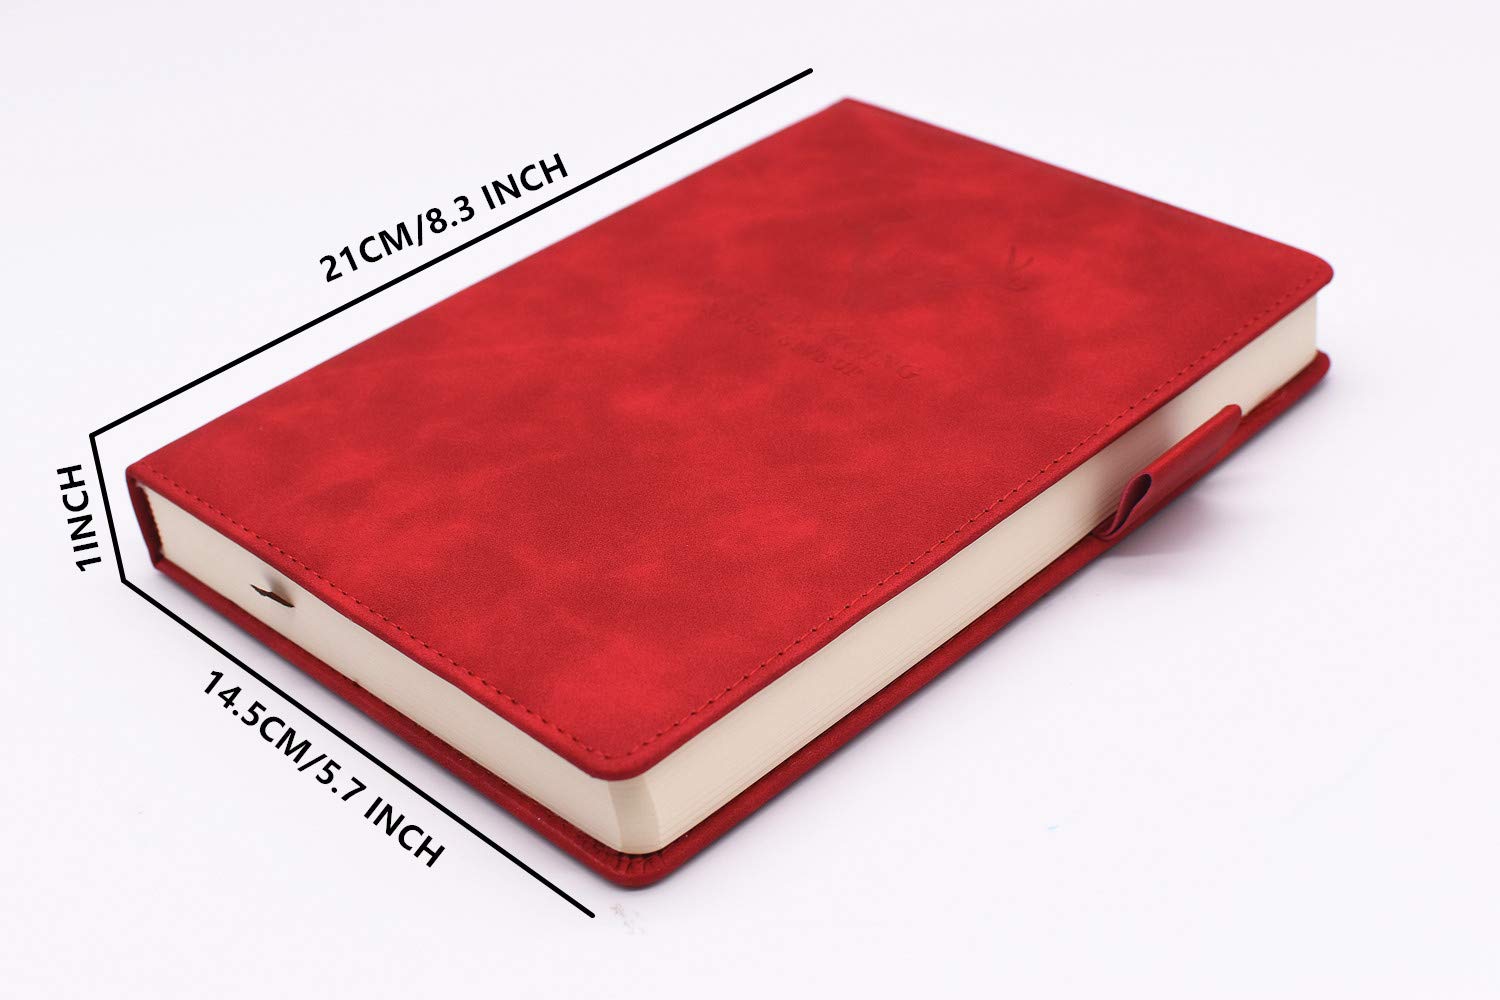 A5 Ruled Notebook Journal - Hardcover Executive Notebooks with Premium Thick Paper, College Lined Journal, 8.3 inches×5.7 inches,360 Page, Perfect for Office Home School Business Writing & Note Taking (Red)